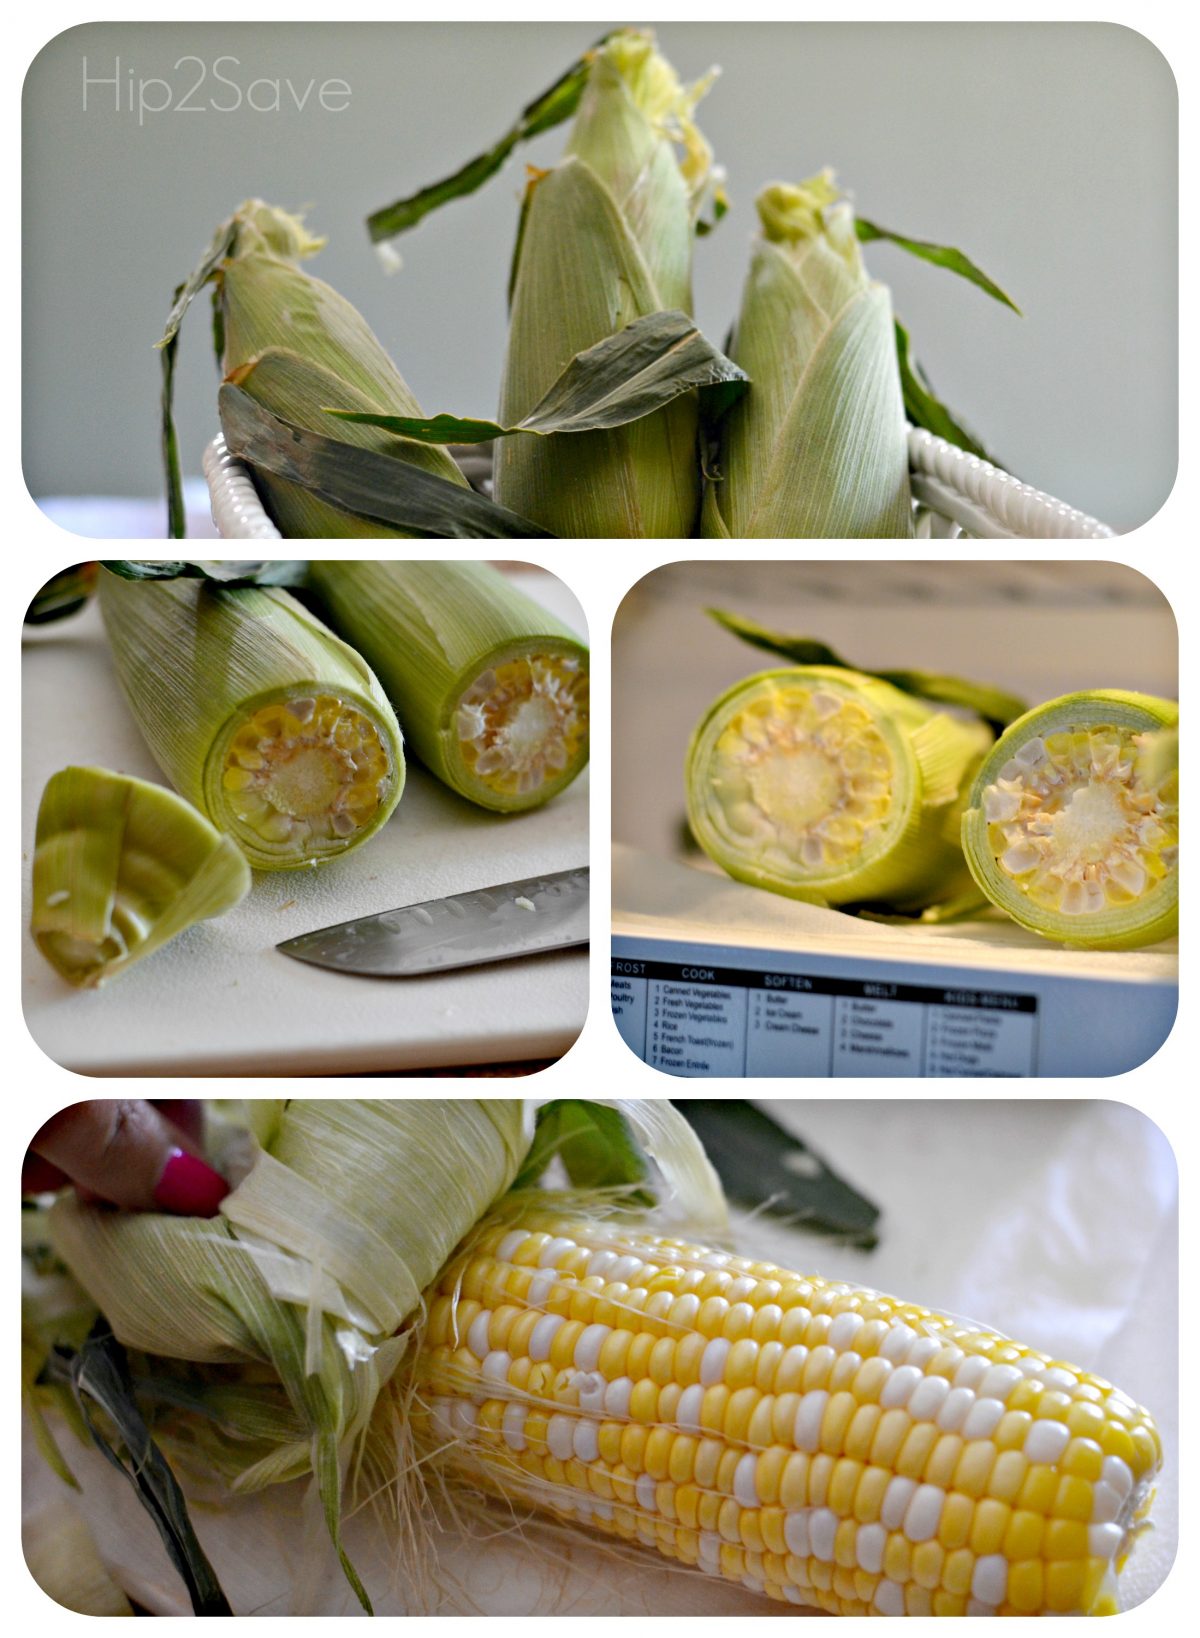 Cool Corn Cooking & Cleaning Trick Hip2Save